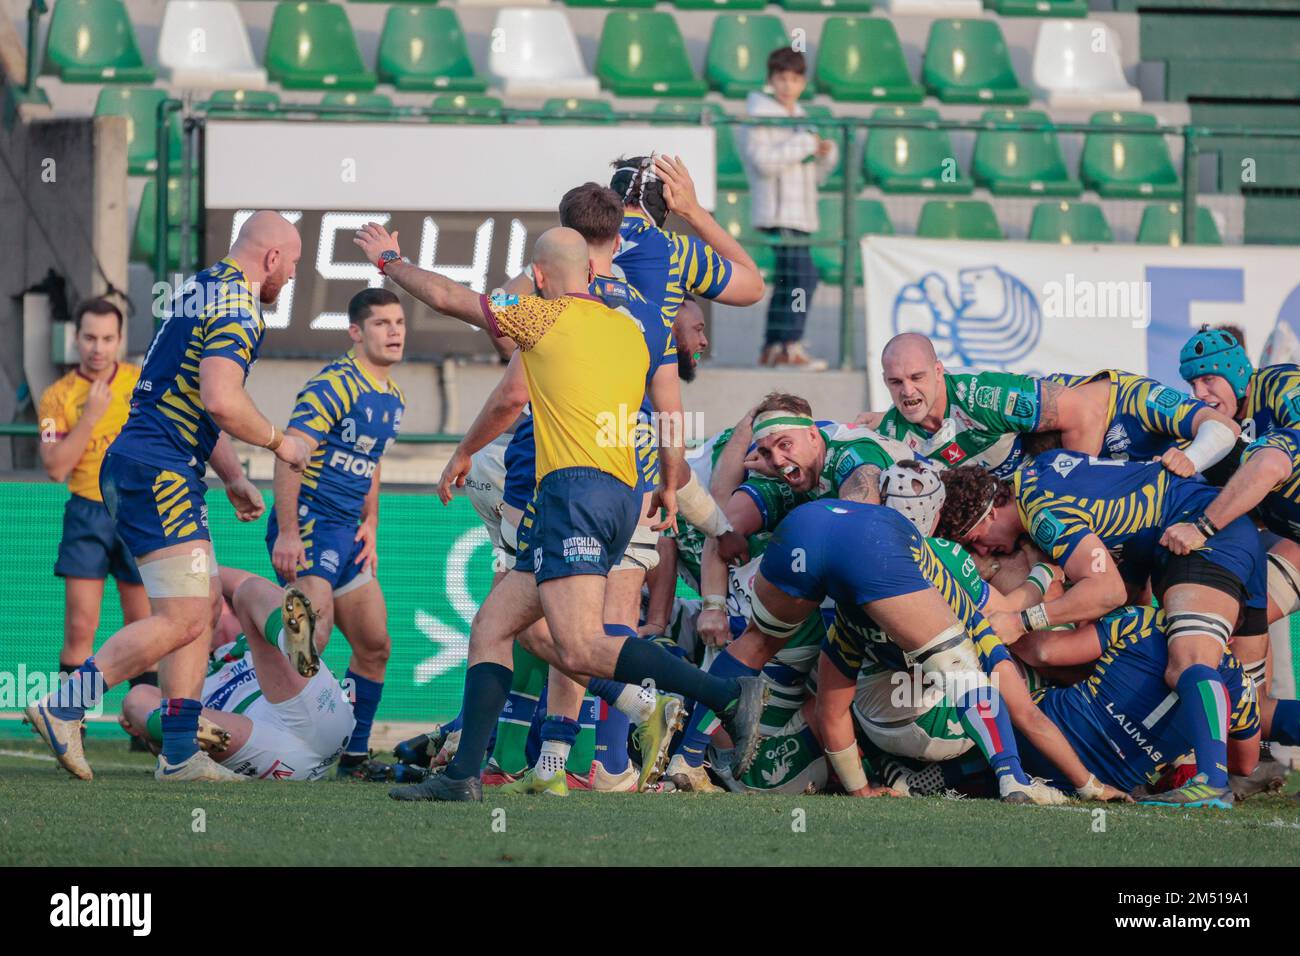 Treviso, Italy. 24th Dec, 2022. Benetton happiness during Benetton Rugby vs  Zebre Rugby Club, United Rugby Championship match in Treviso, Italy,  December 24 2022 Credit: Independent Photo Agency/Alamy Live News Stock  Photo - Alamy